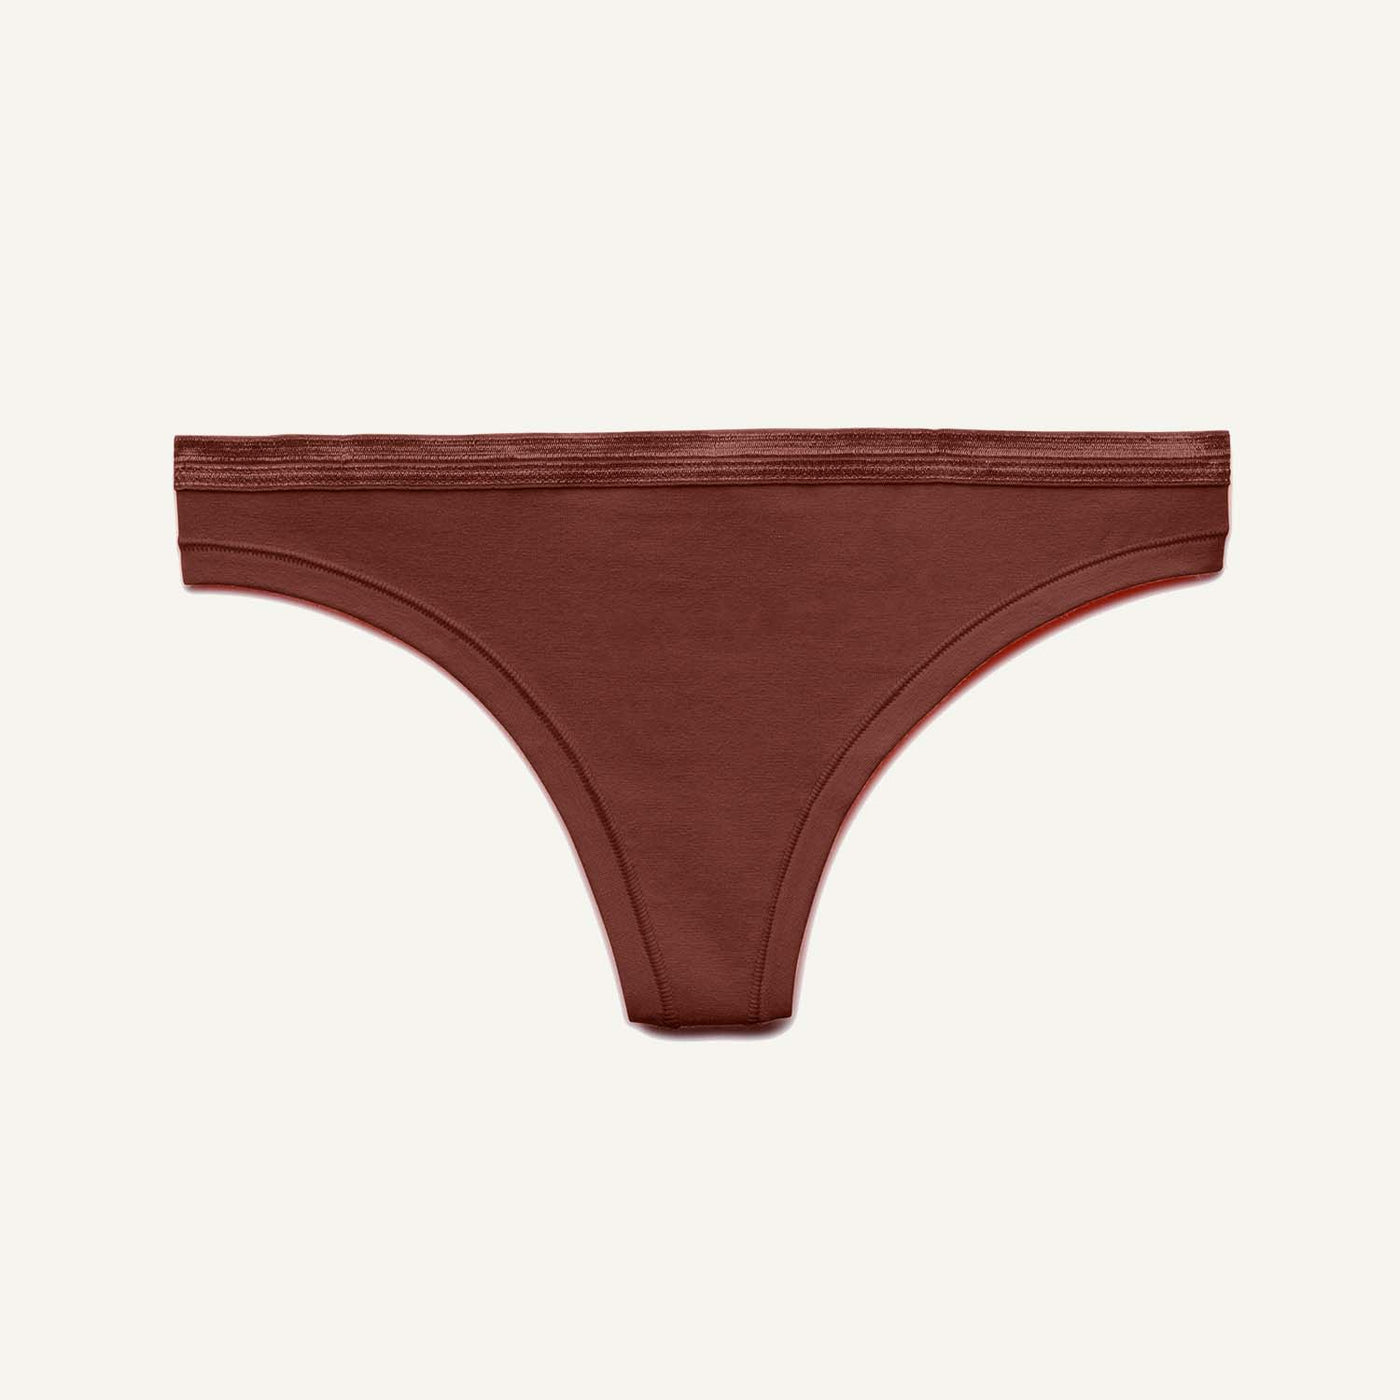 Subset Organic Cotton Low-Rise Thong: Available in sizes 2XS-3XL